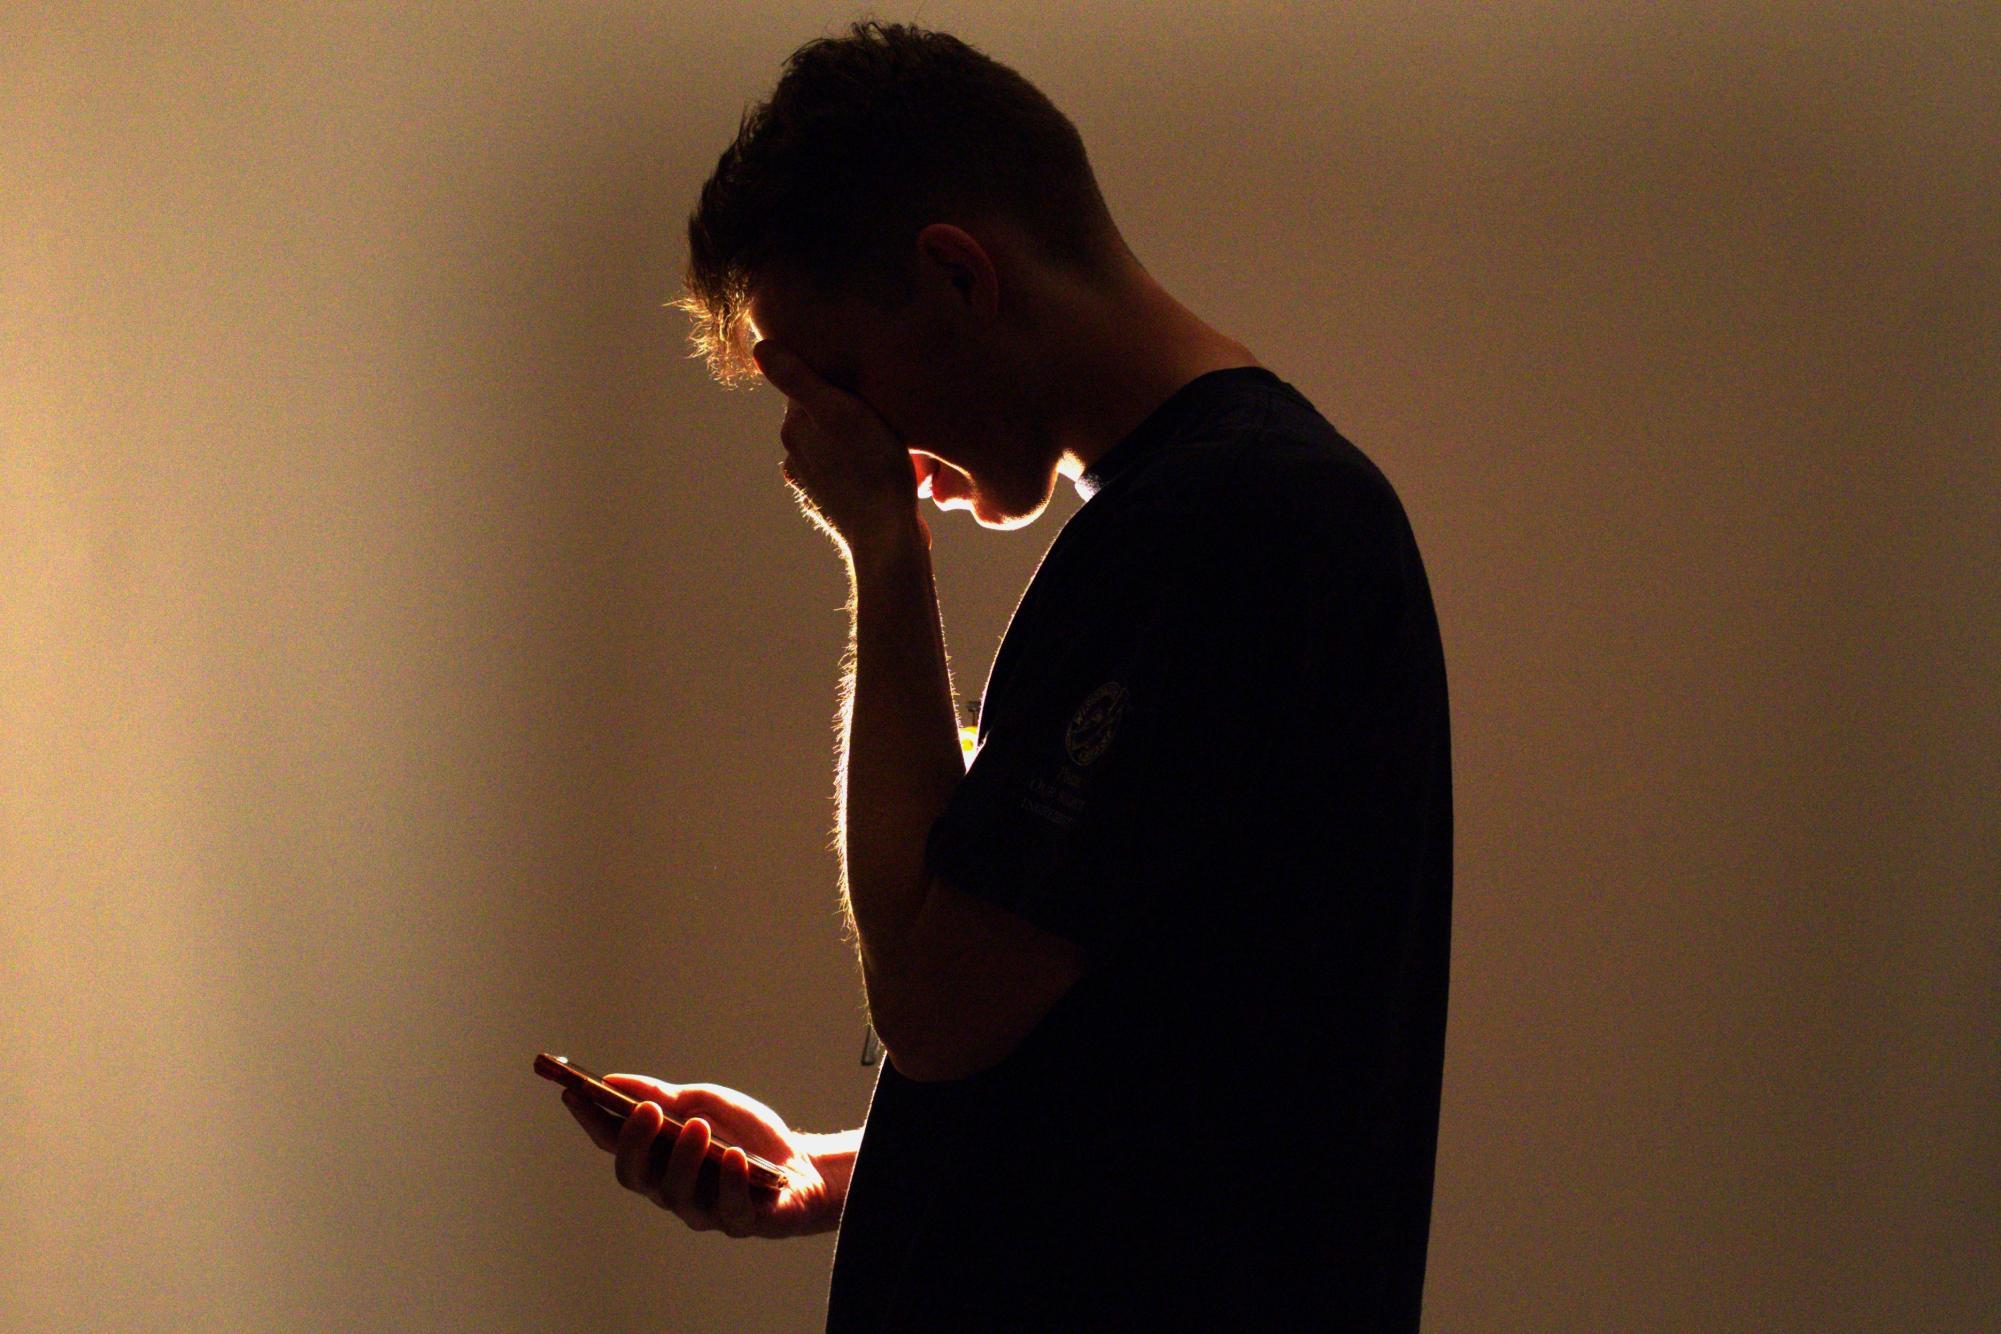 Is there a market capitalizing on loneliness? Opinion columnist Bj Barnes says online pay-to-chat services are a symptom of youth loneliness and an inability to socialize with peers. (Photo by Chris Swann/The Battalion)